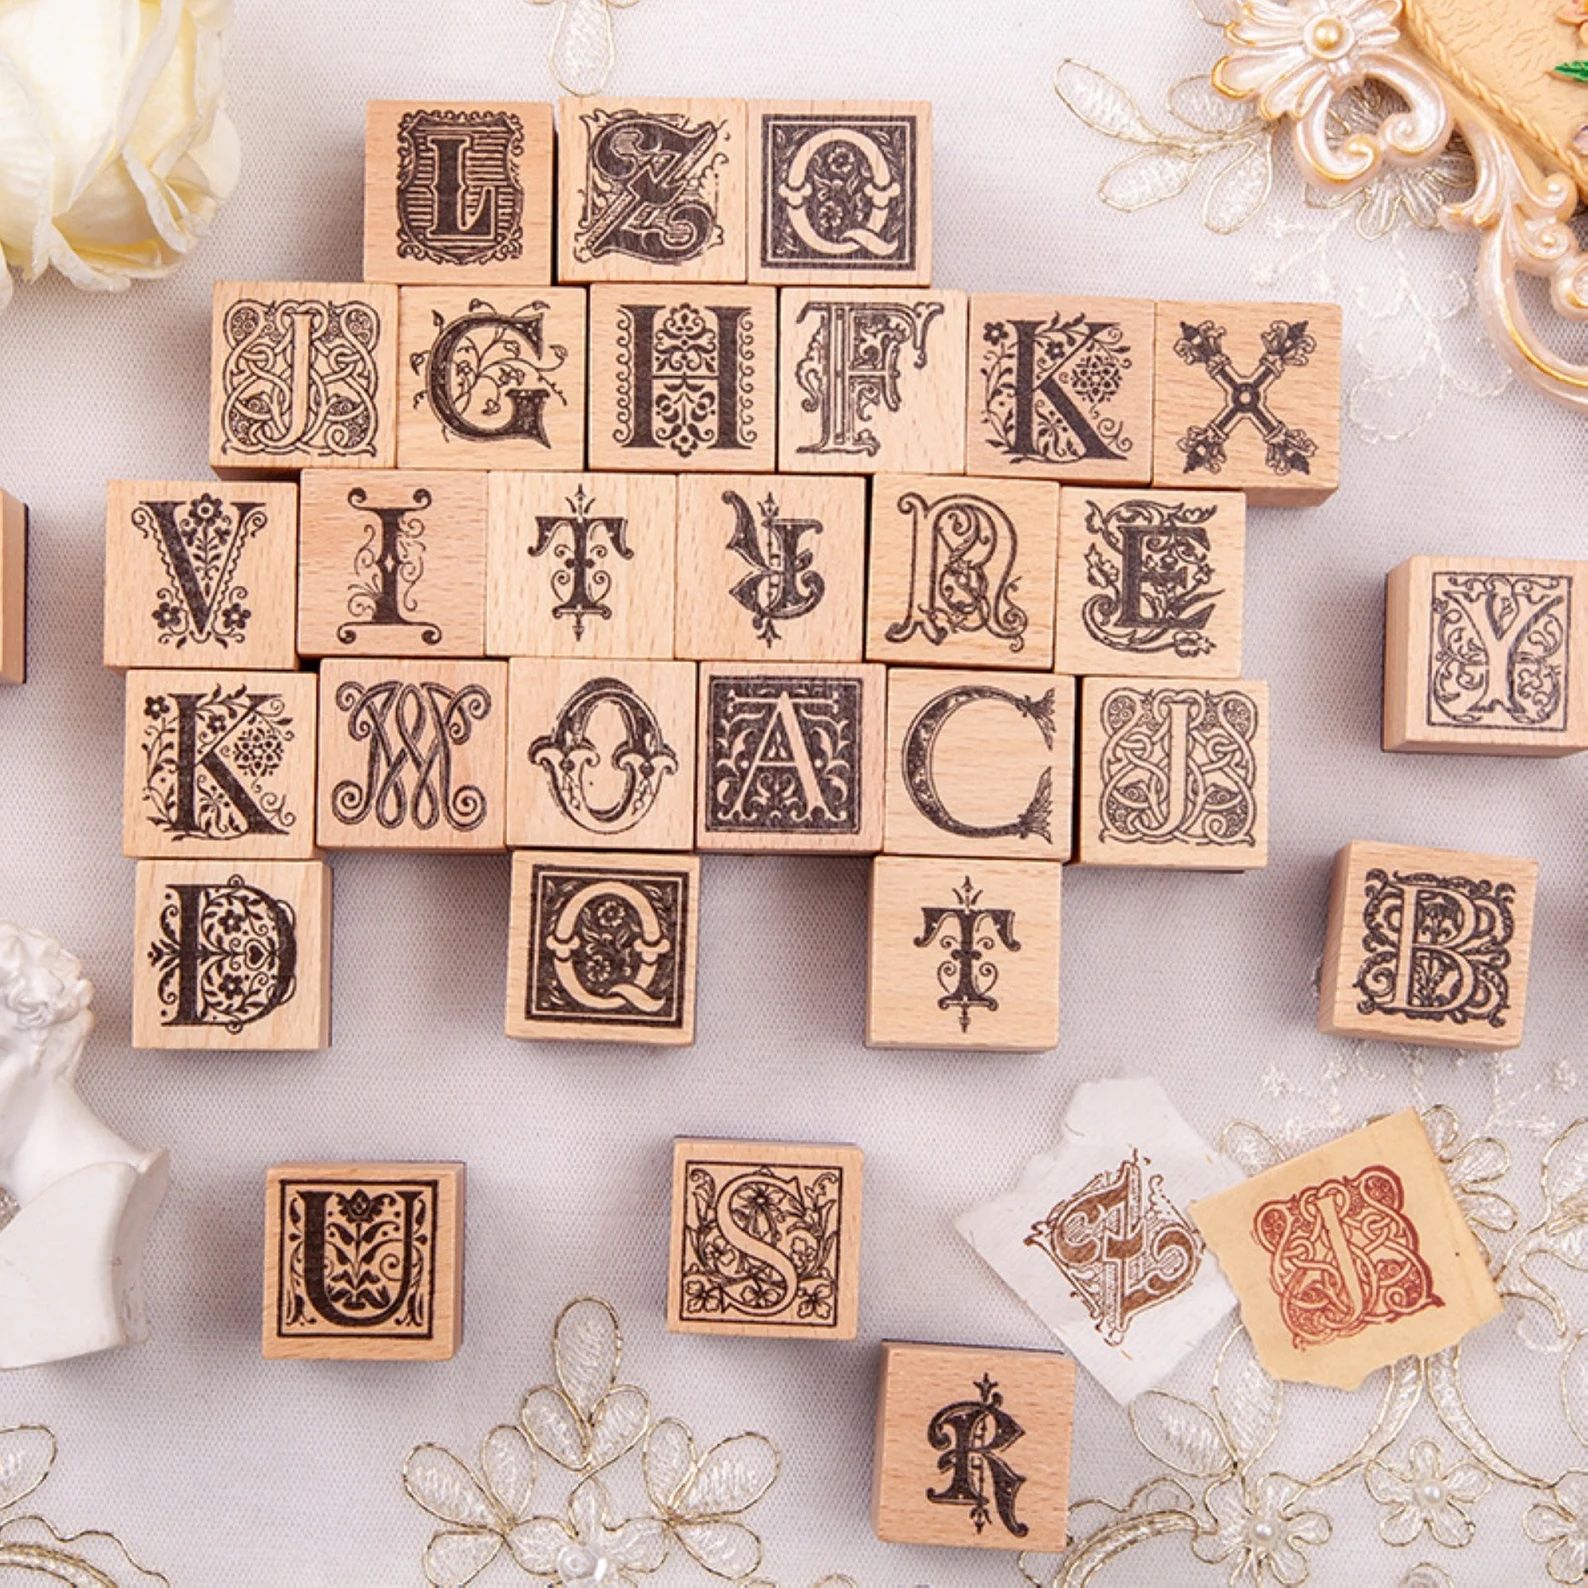 stamps of capital letters to look like illuminated manuscipt letters